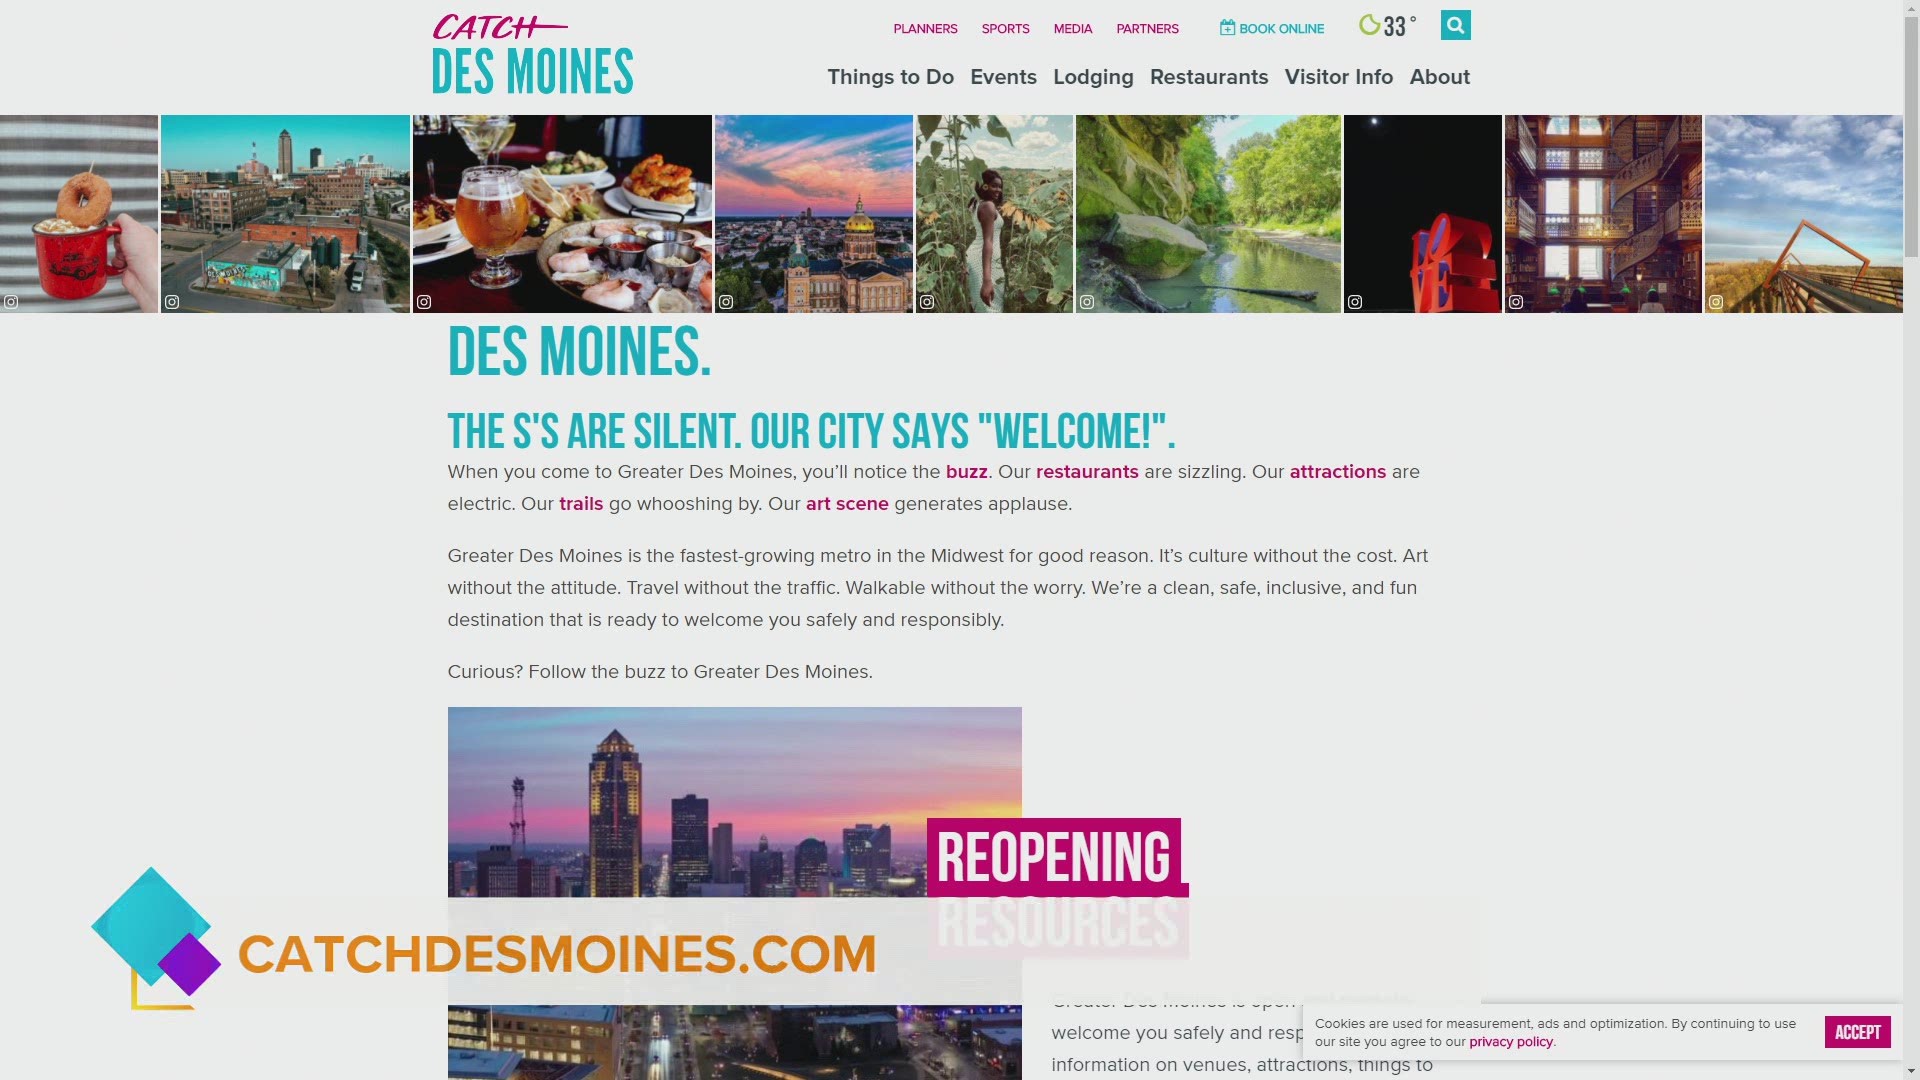 This week, Catch Des Moines launched the "Stay Safe Pledge" alongside hospitality partners